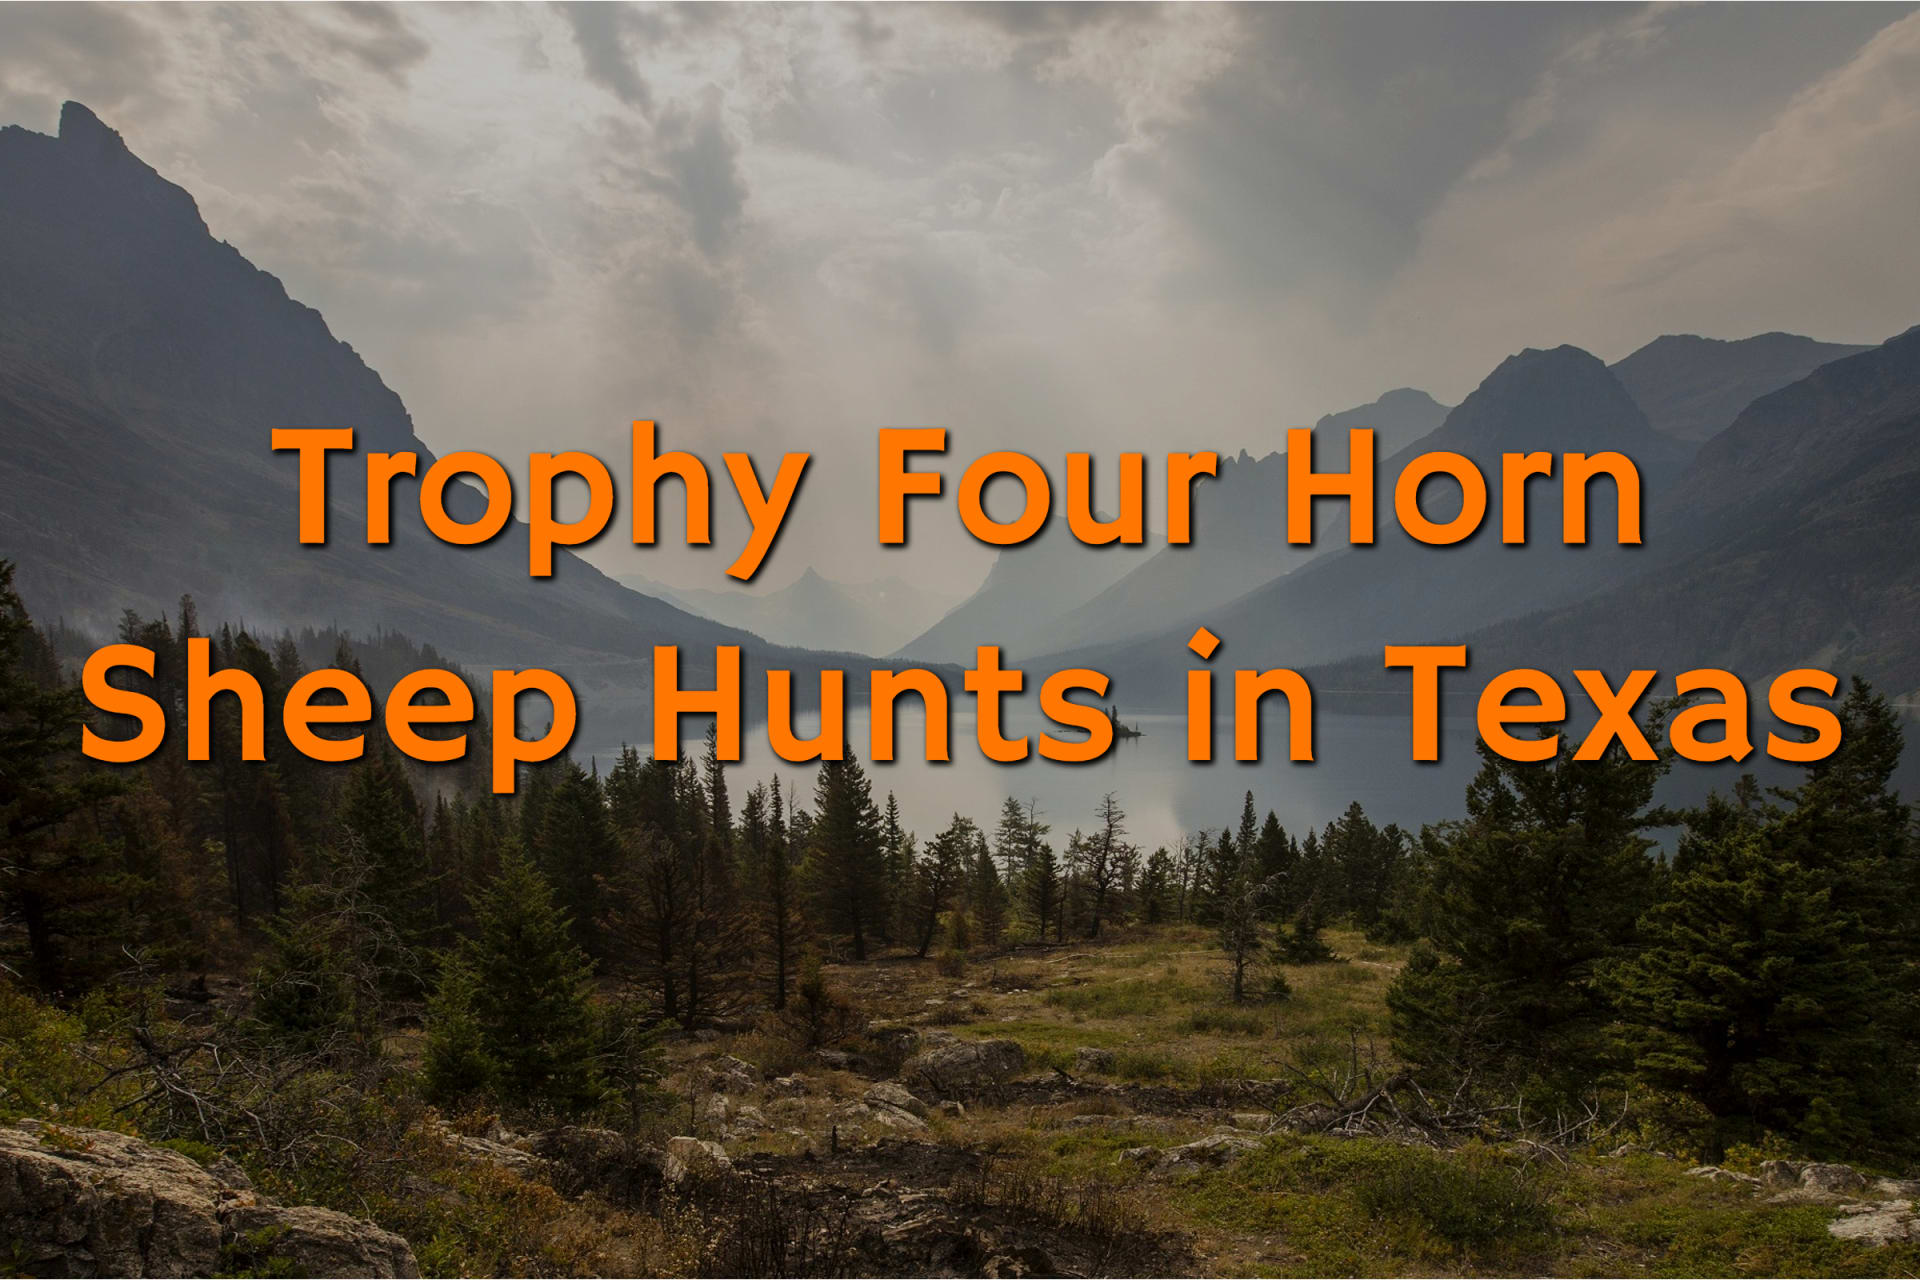 Trophy Four Horn Sheep Hunts in Texas